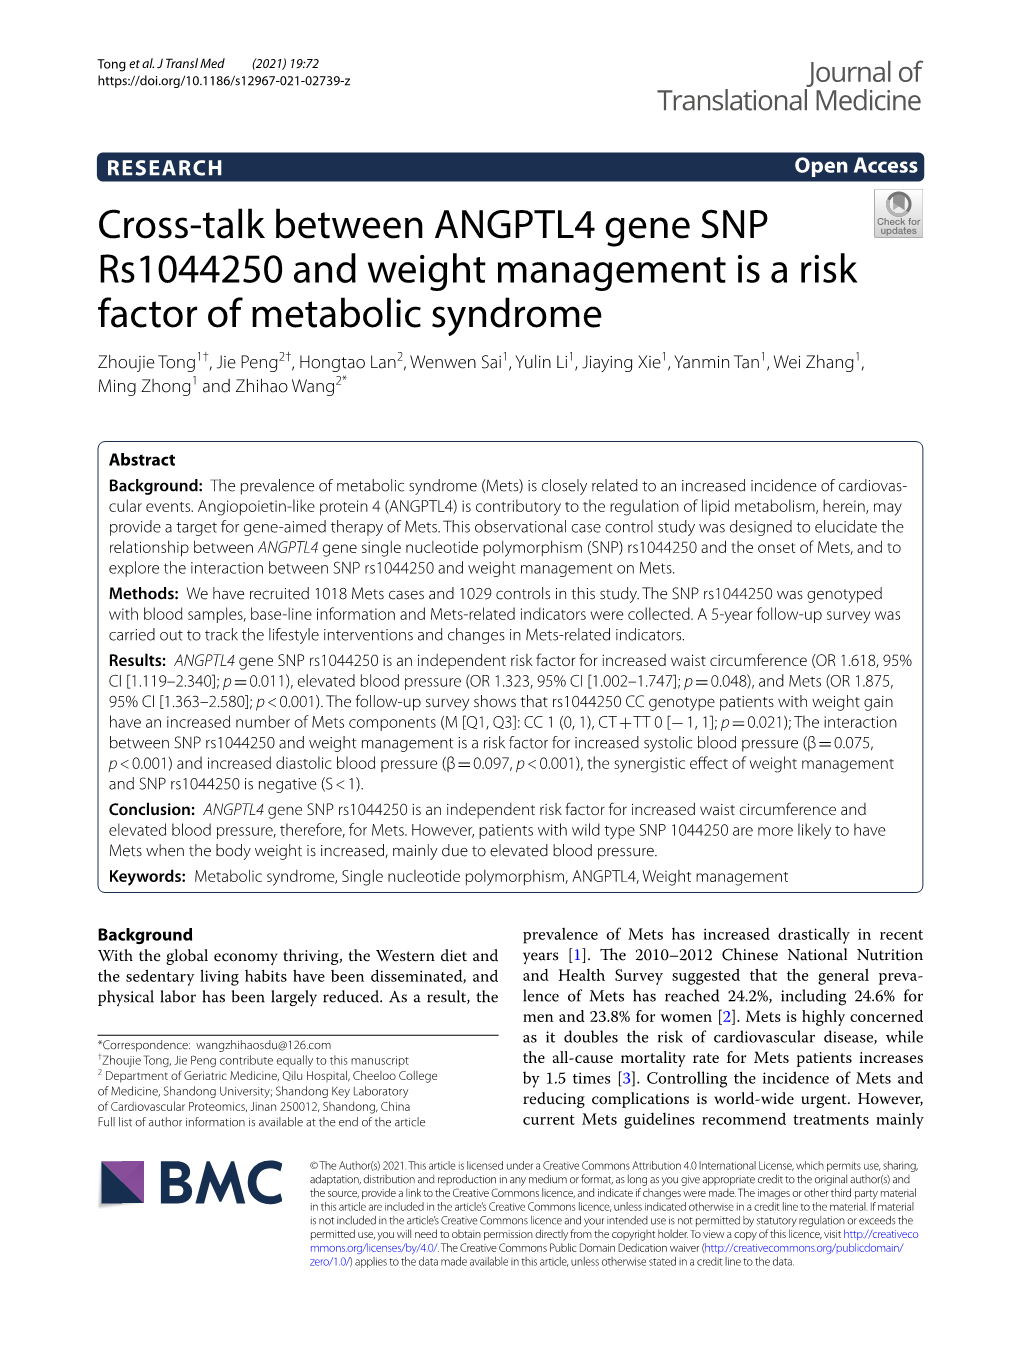 Cross-Talk Between ANGPTL4 Gene SNP Rs1044250 and Weight